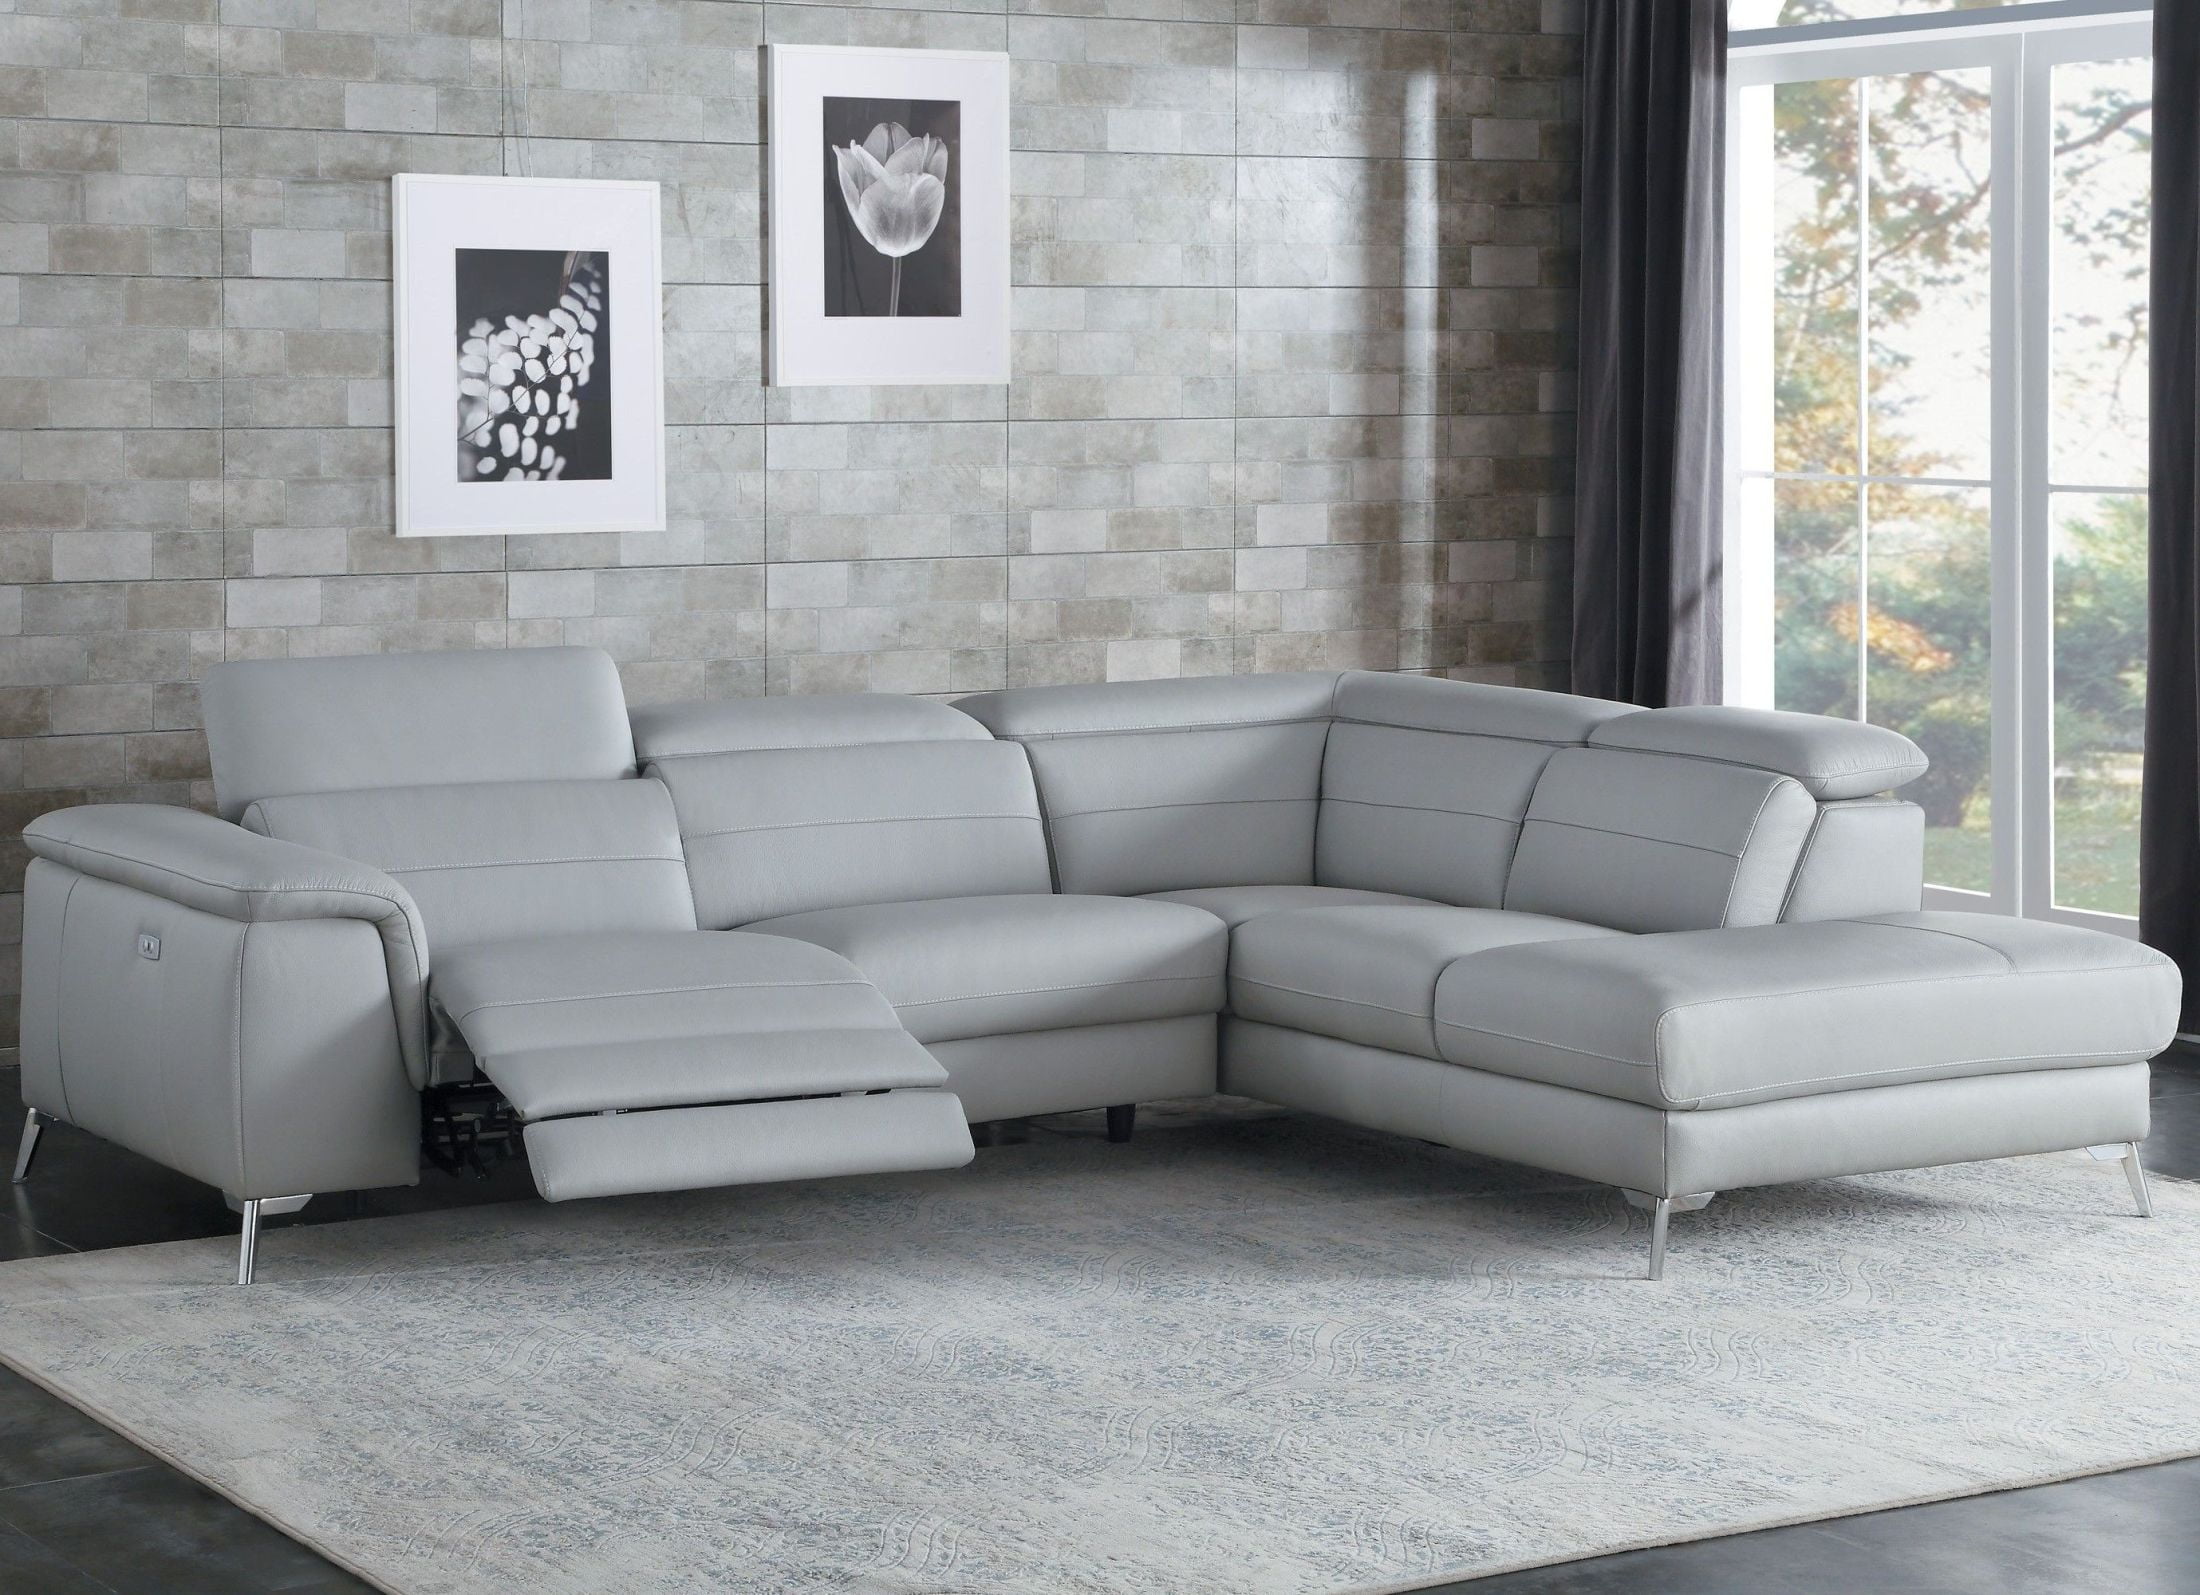 kuka grey leather power recliner sectional sofa chaise